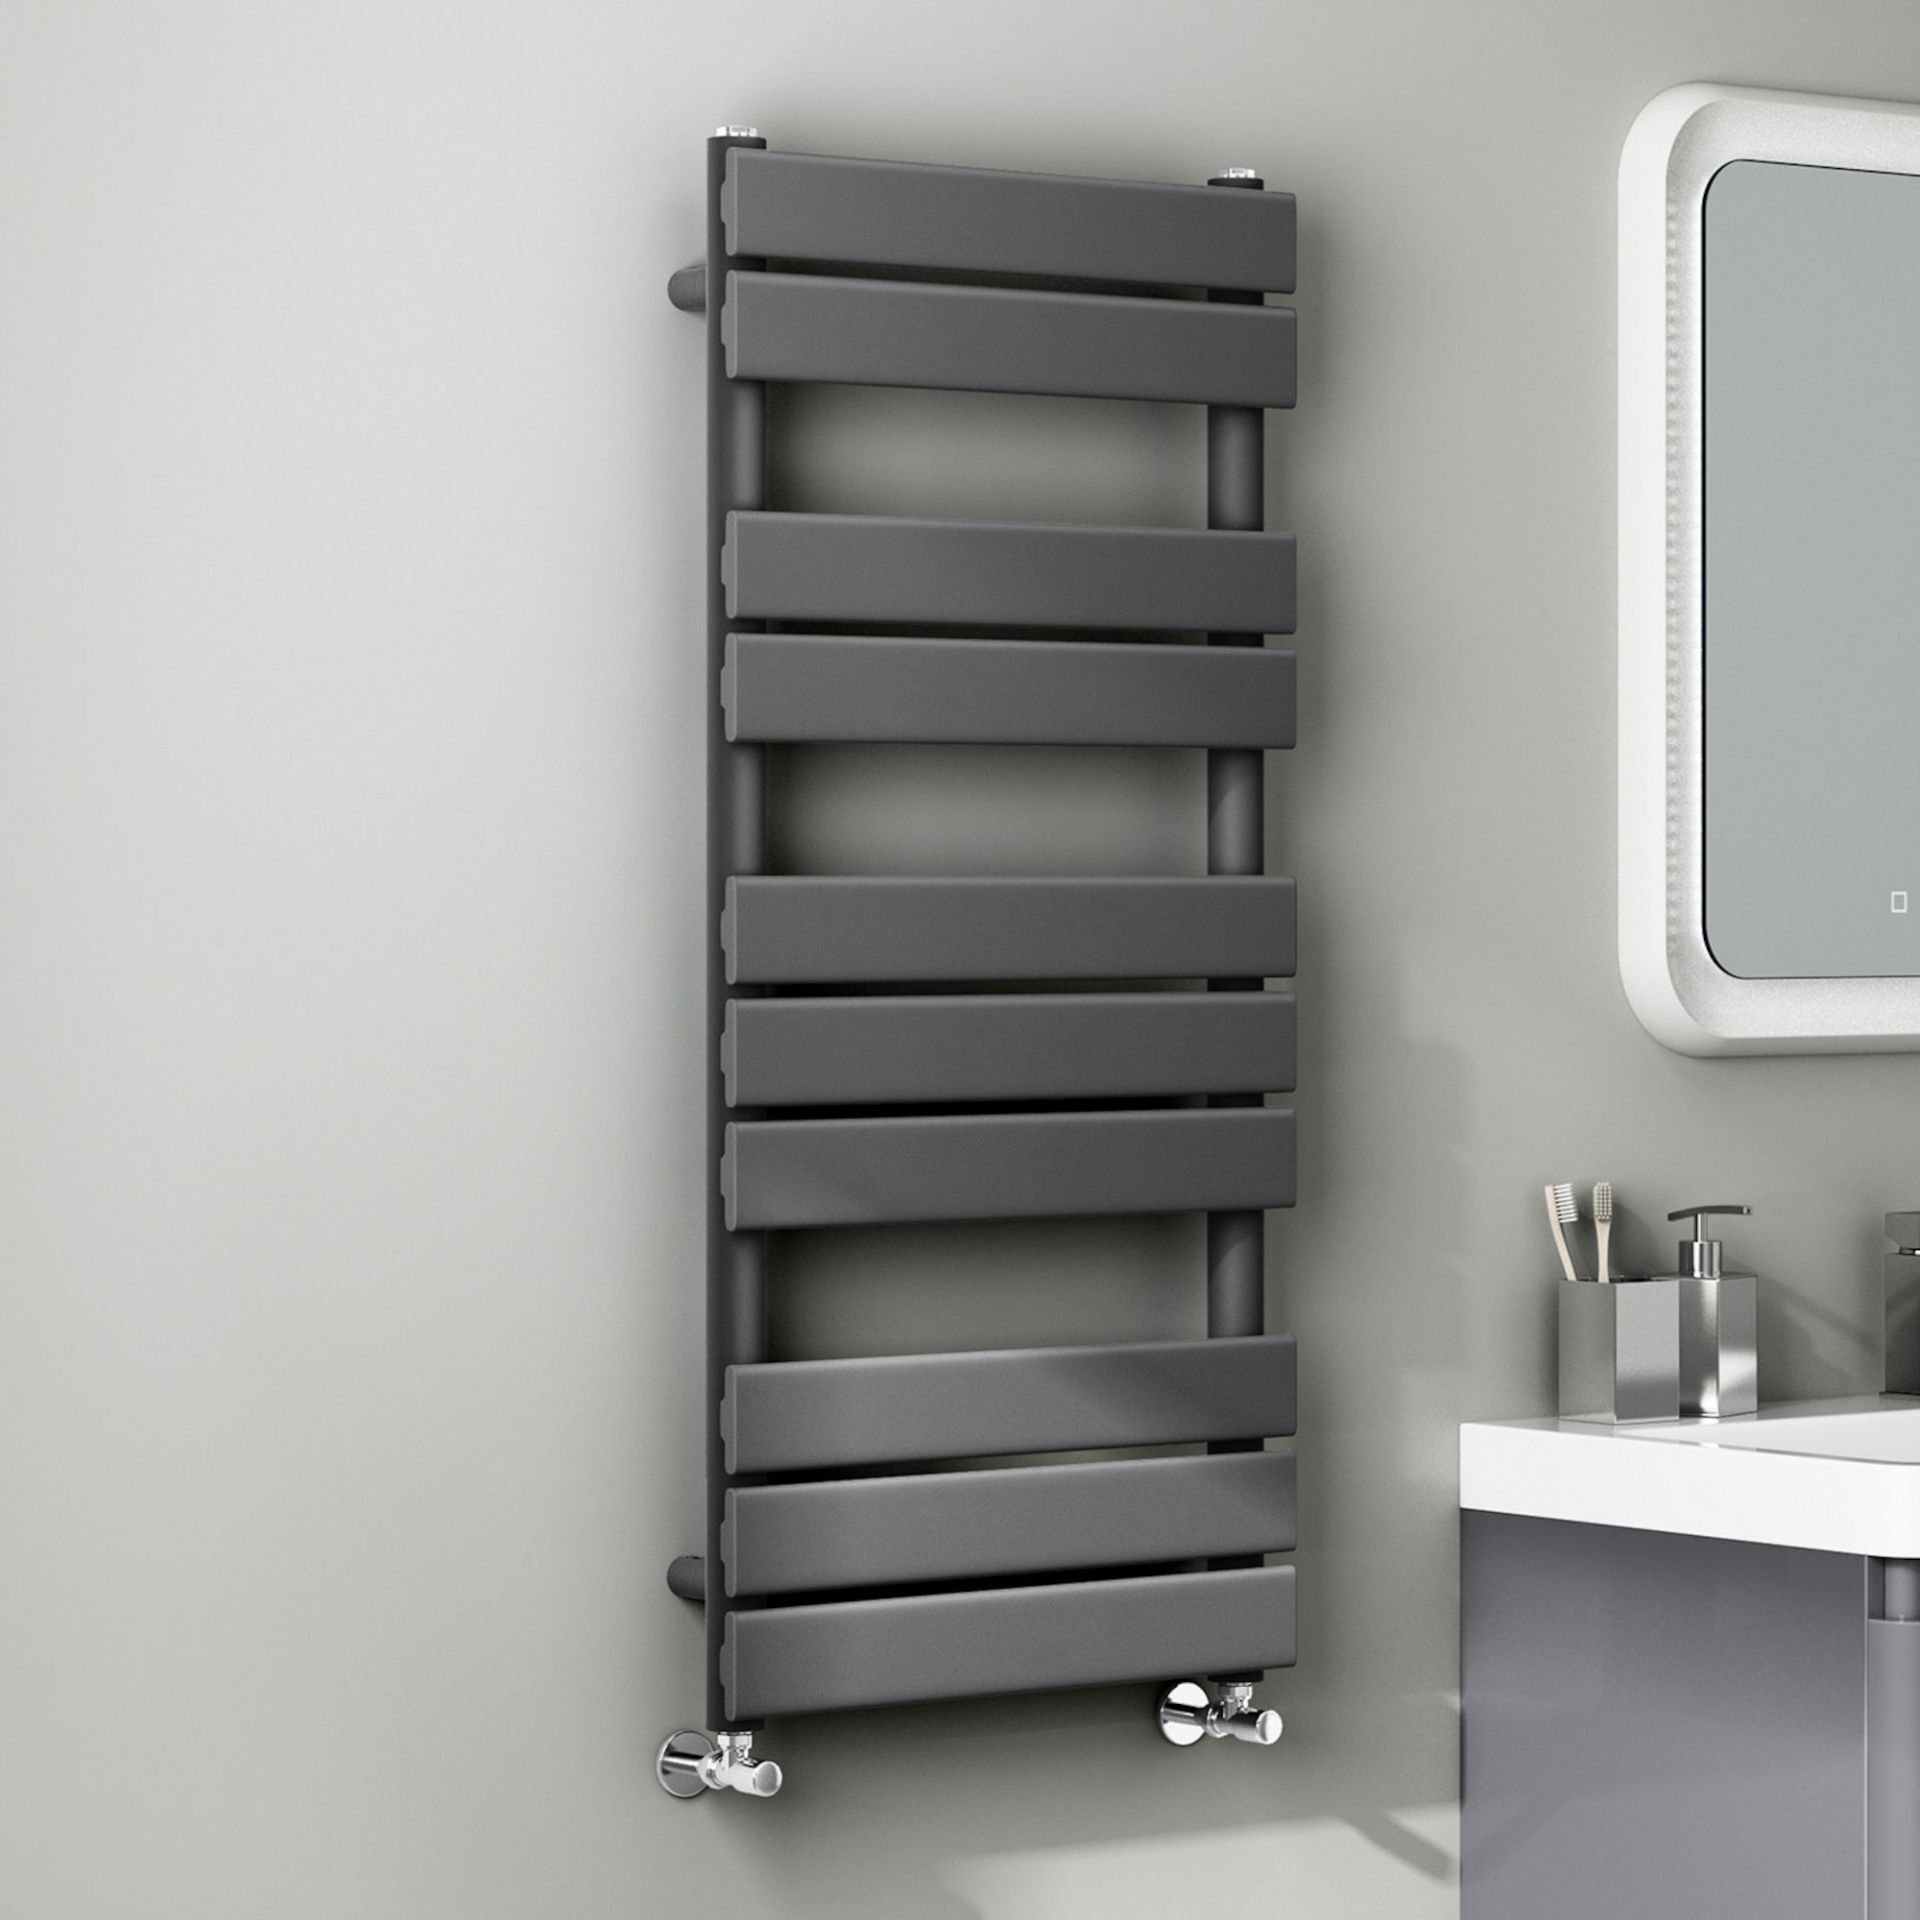 (KL42) 1000x450mm Anthracite Flat Panel Ladder Towel Radiator. Made with low carbon steel,